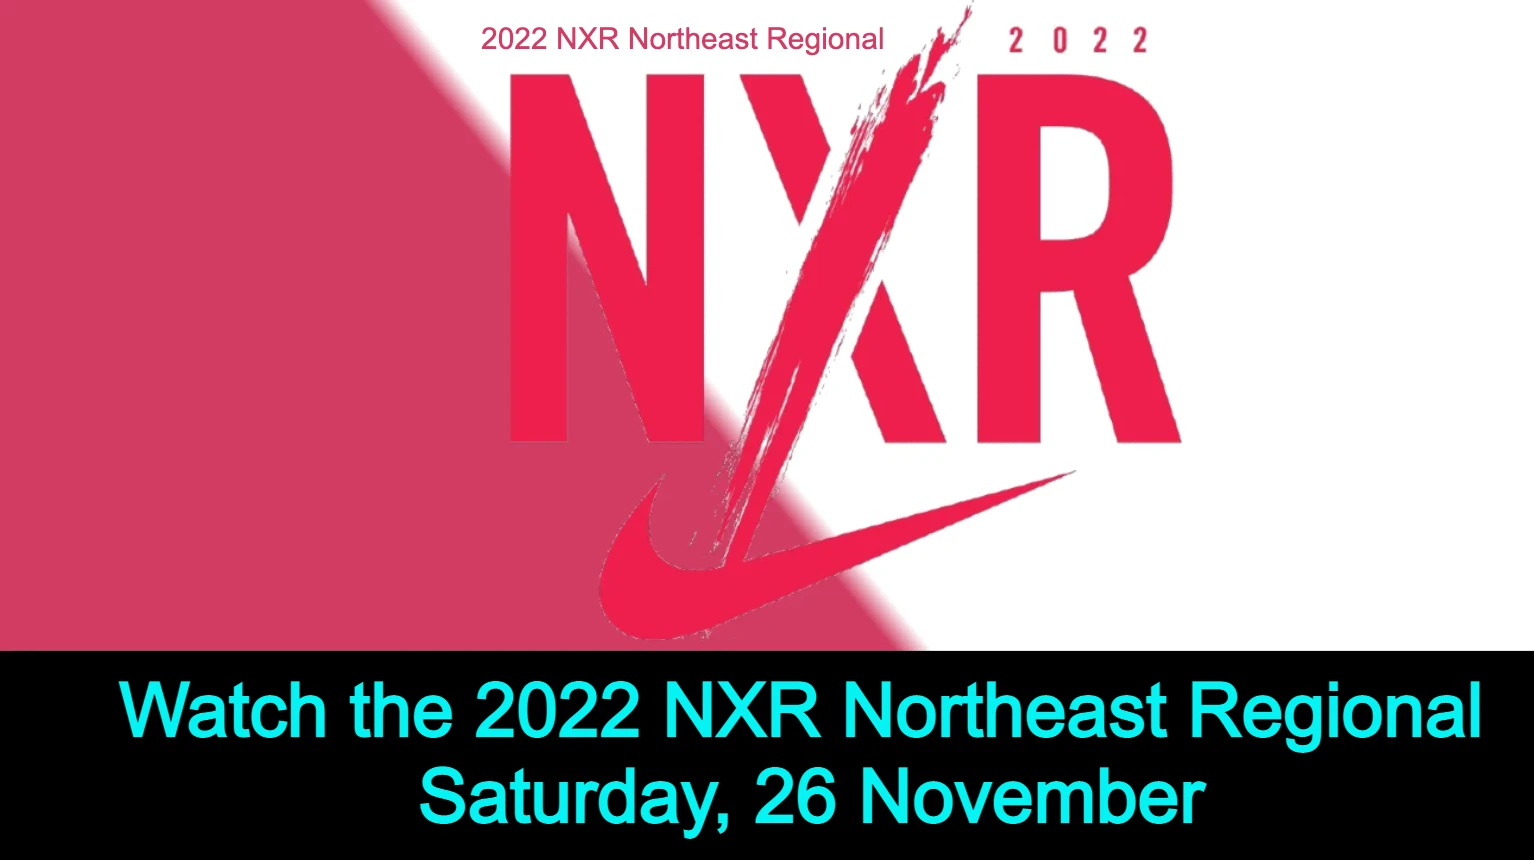 You can watch the 2022 NXR Northeast Regional on RunnerSpace